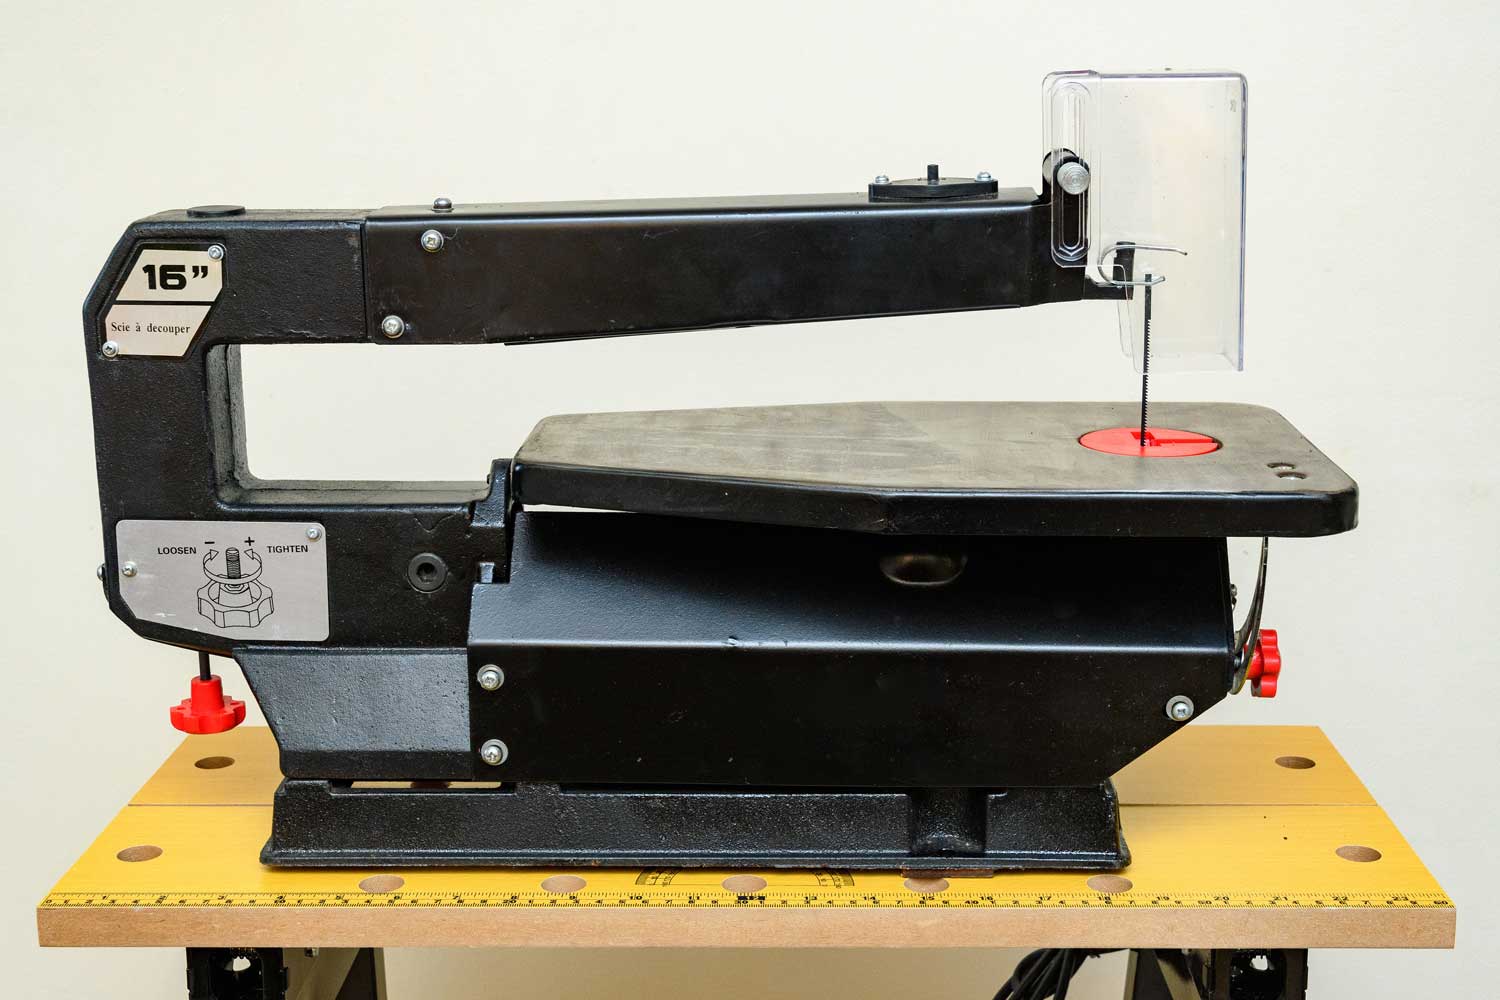 A scroll saw with a Pin End scroll saw blade